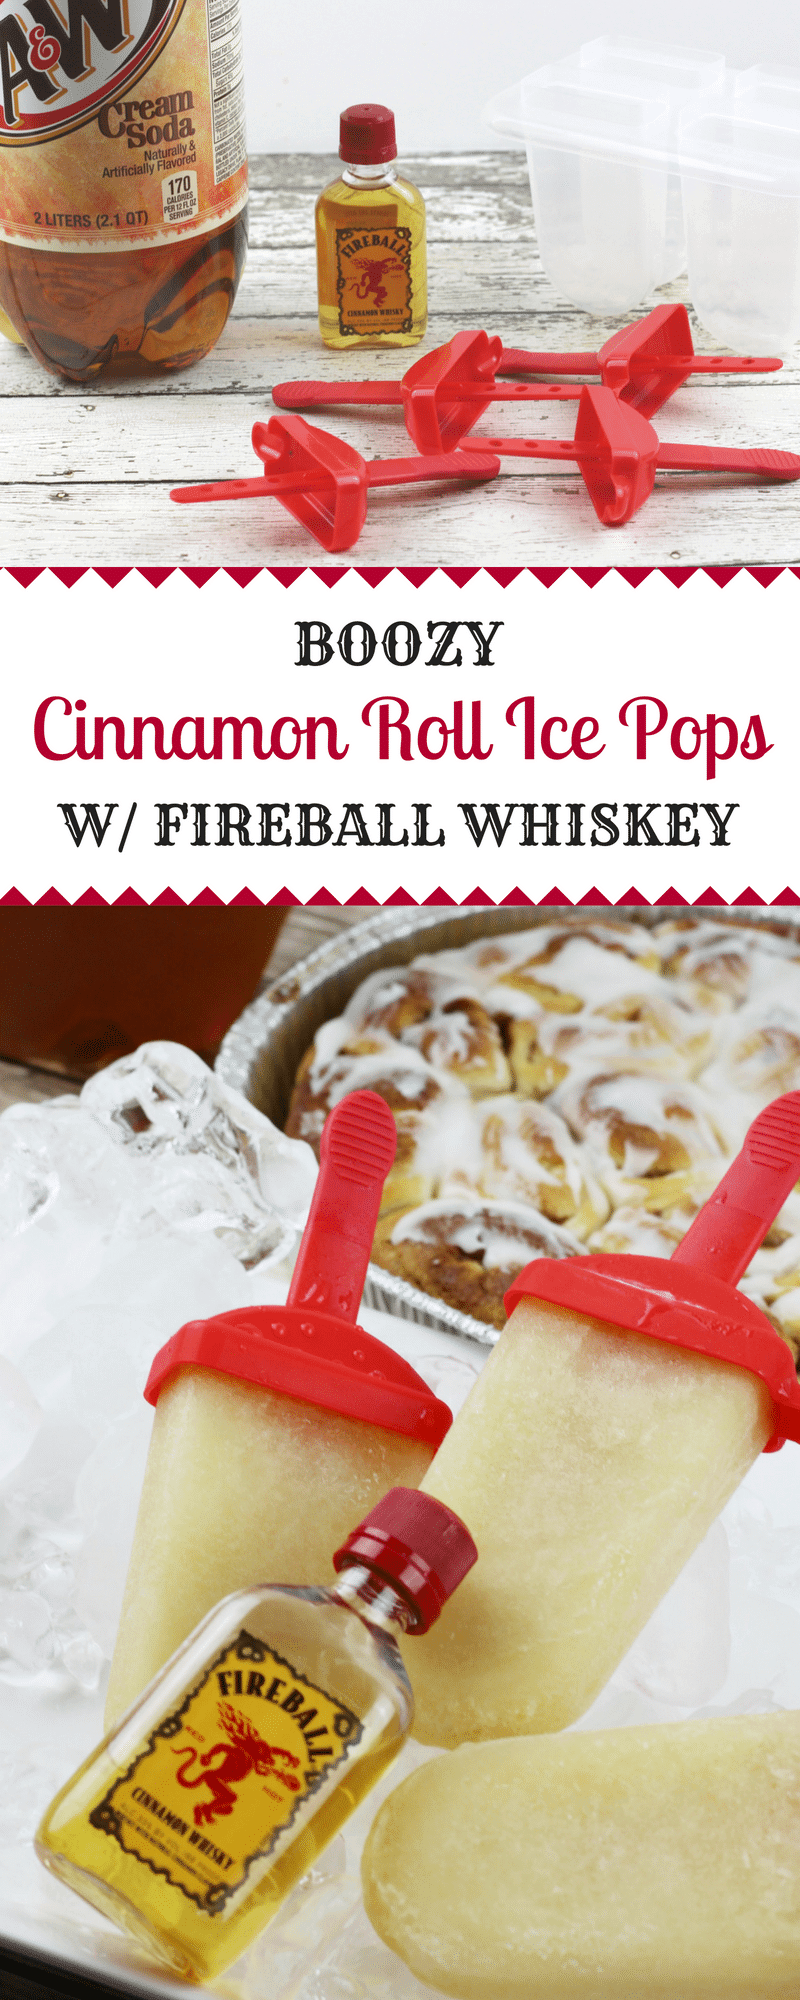 Inspired by the Cinnamon Roll Cocktail, these delicious Fireball Whiskey cinnamon roll ice pops are made with just 2 ingredients: cream soda and Fireball whiskey.  It doesn't get much simpler than that.